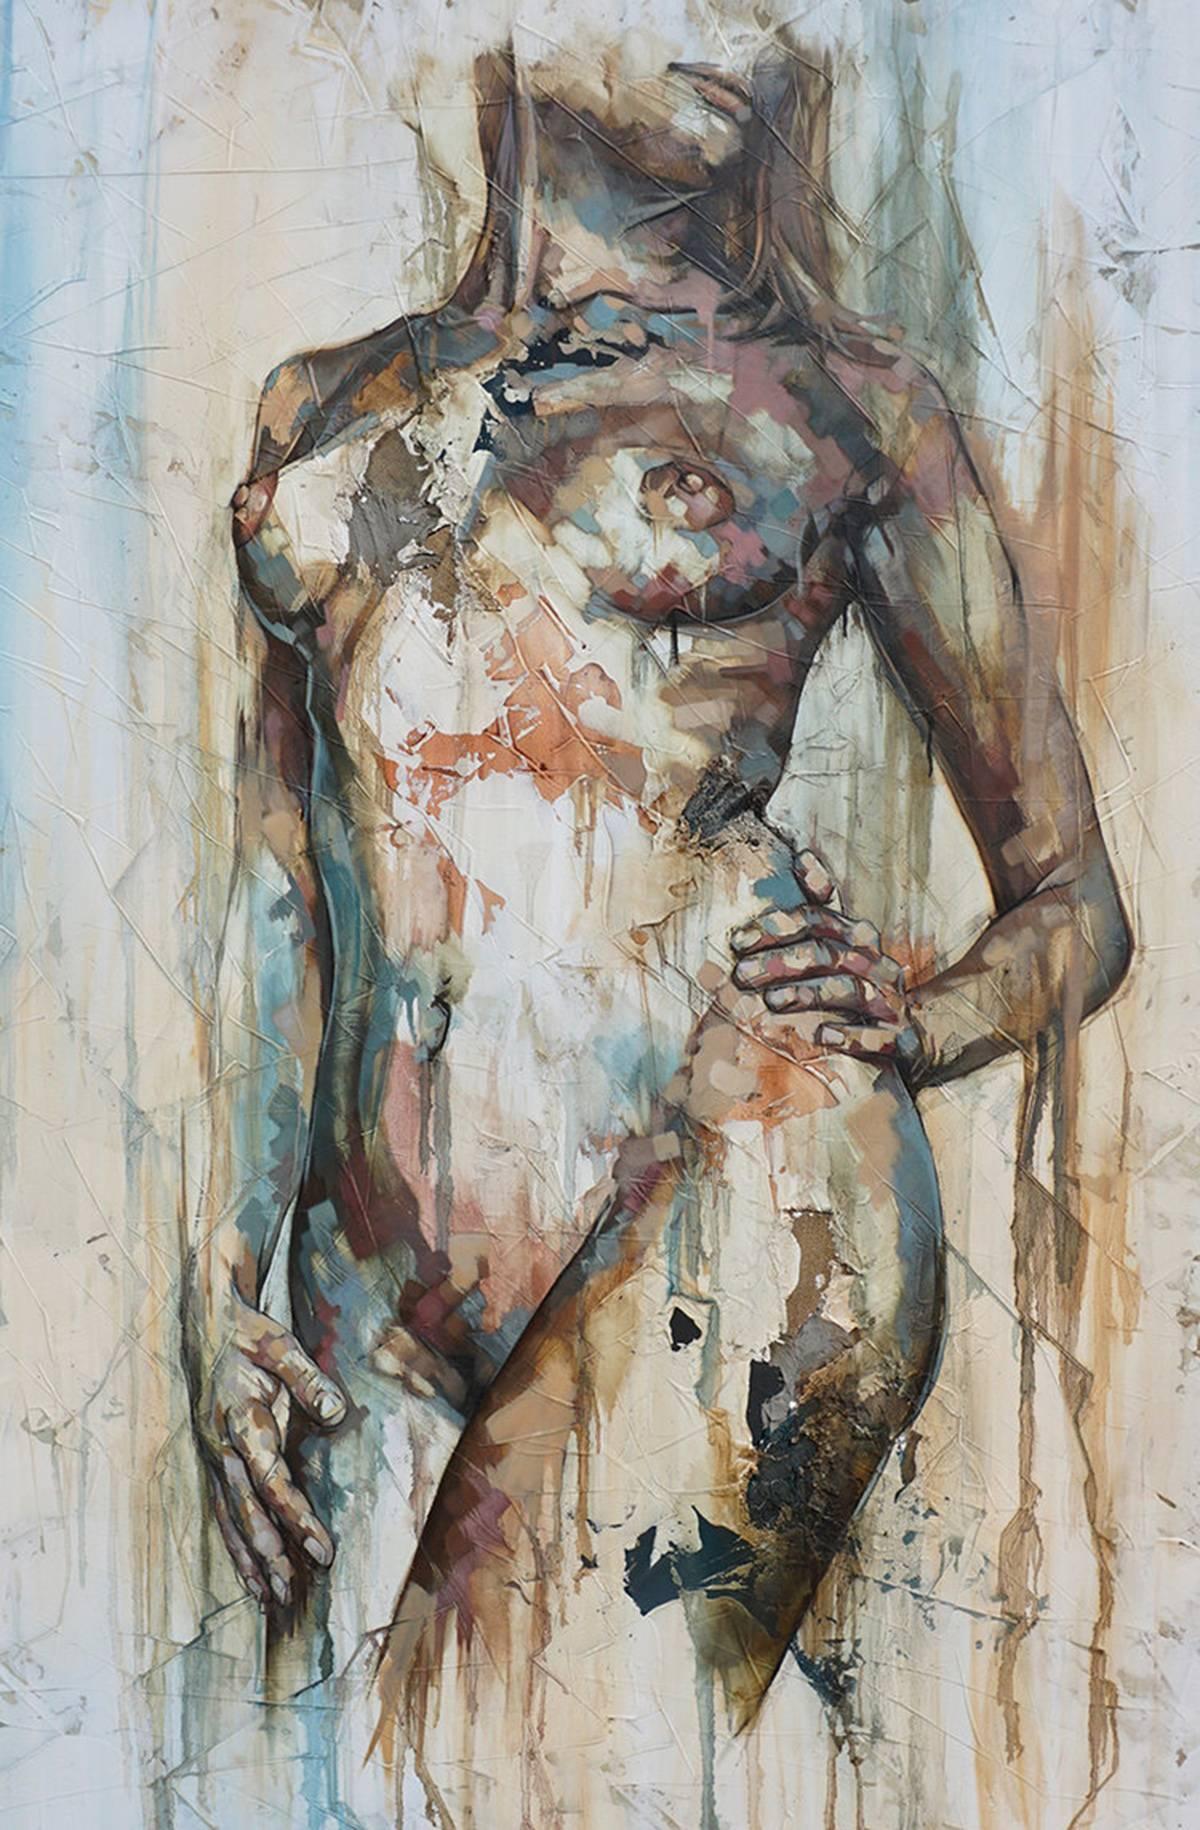 Francisco Jose Jimenez paints abstracted nude paintings using a range of materials, such as fabric, concrete, pieces of plastic etc.
His portraits tell stories of imperfect beauty, in contrast to today's perfect portrayal of naked women in the